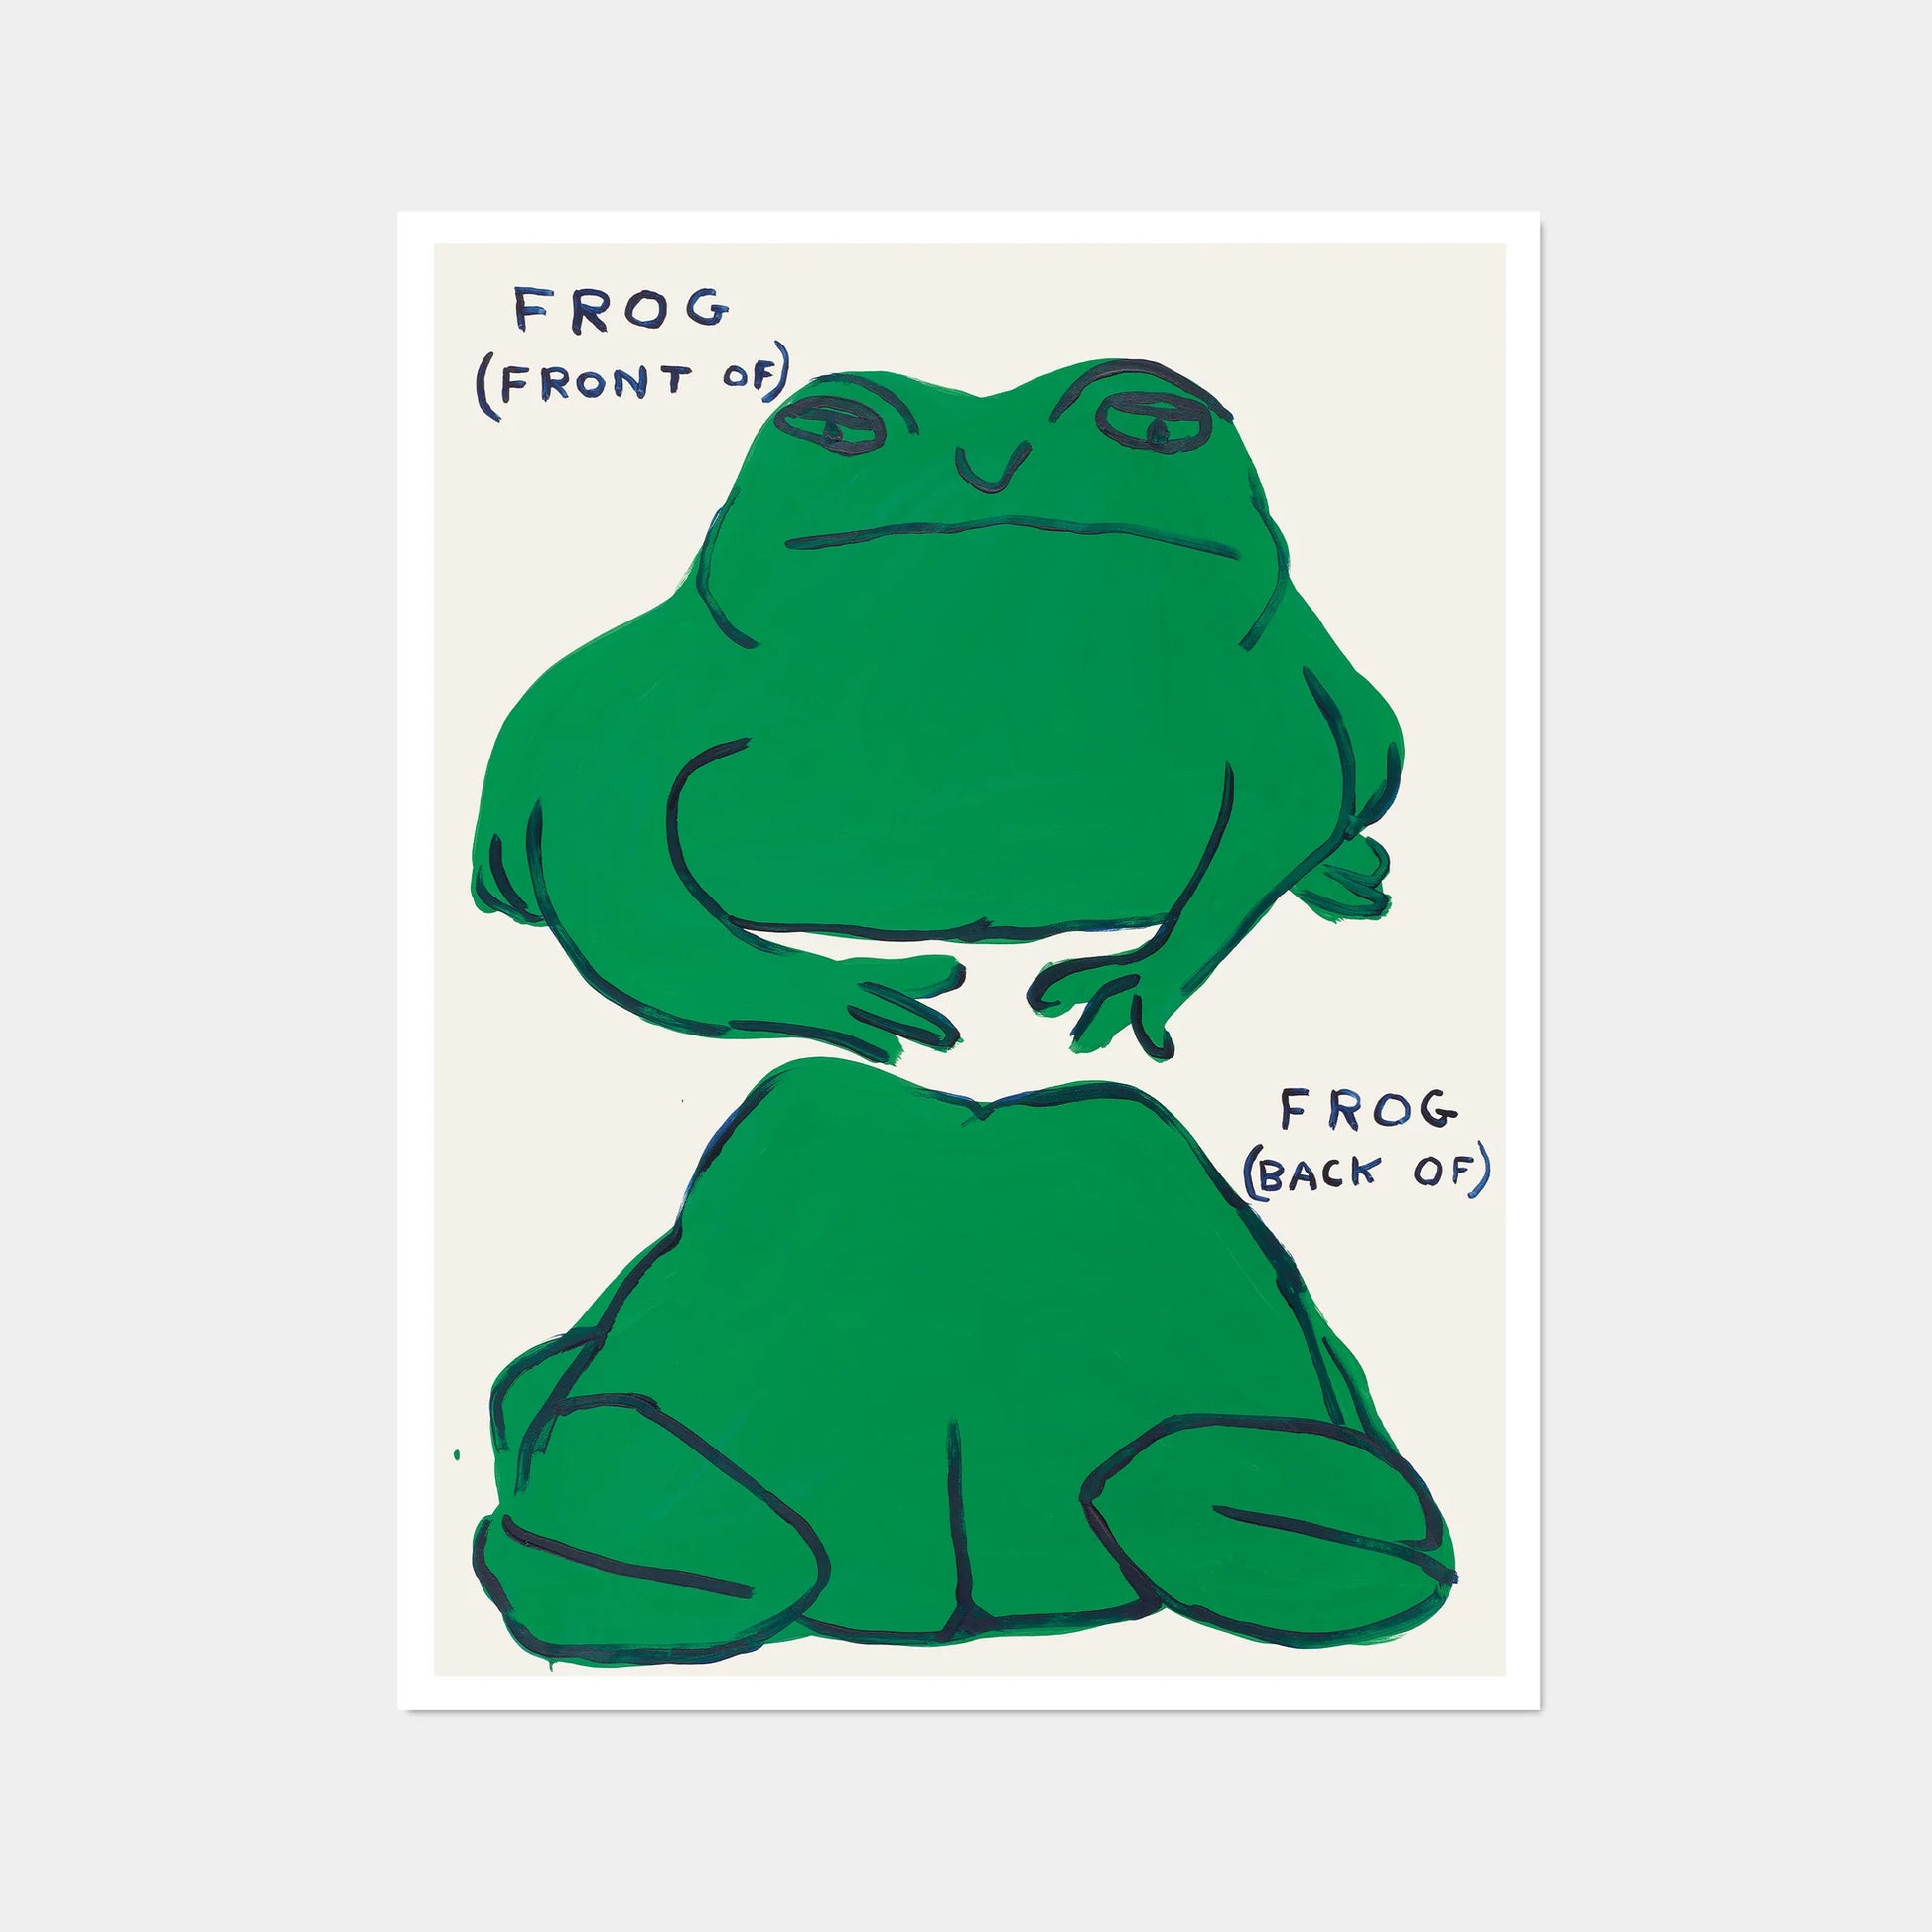 photo of a david shrigley art print featuring images of the front and back of a cartoonishly painted frog, with the words 'FROG (FRONT OF) FROG (BACK OF)'. Buy David Shrigley, David Shrigley Prints, David Shrigley art, David Shrigley poster, david shrigley art prints